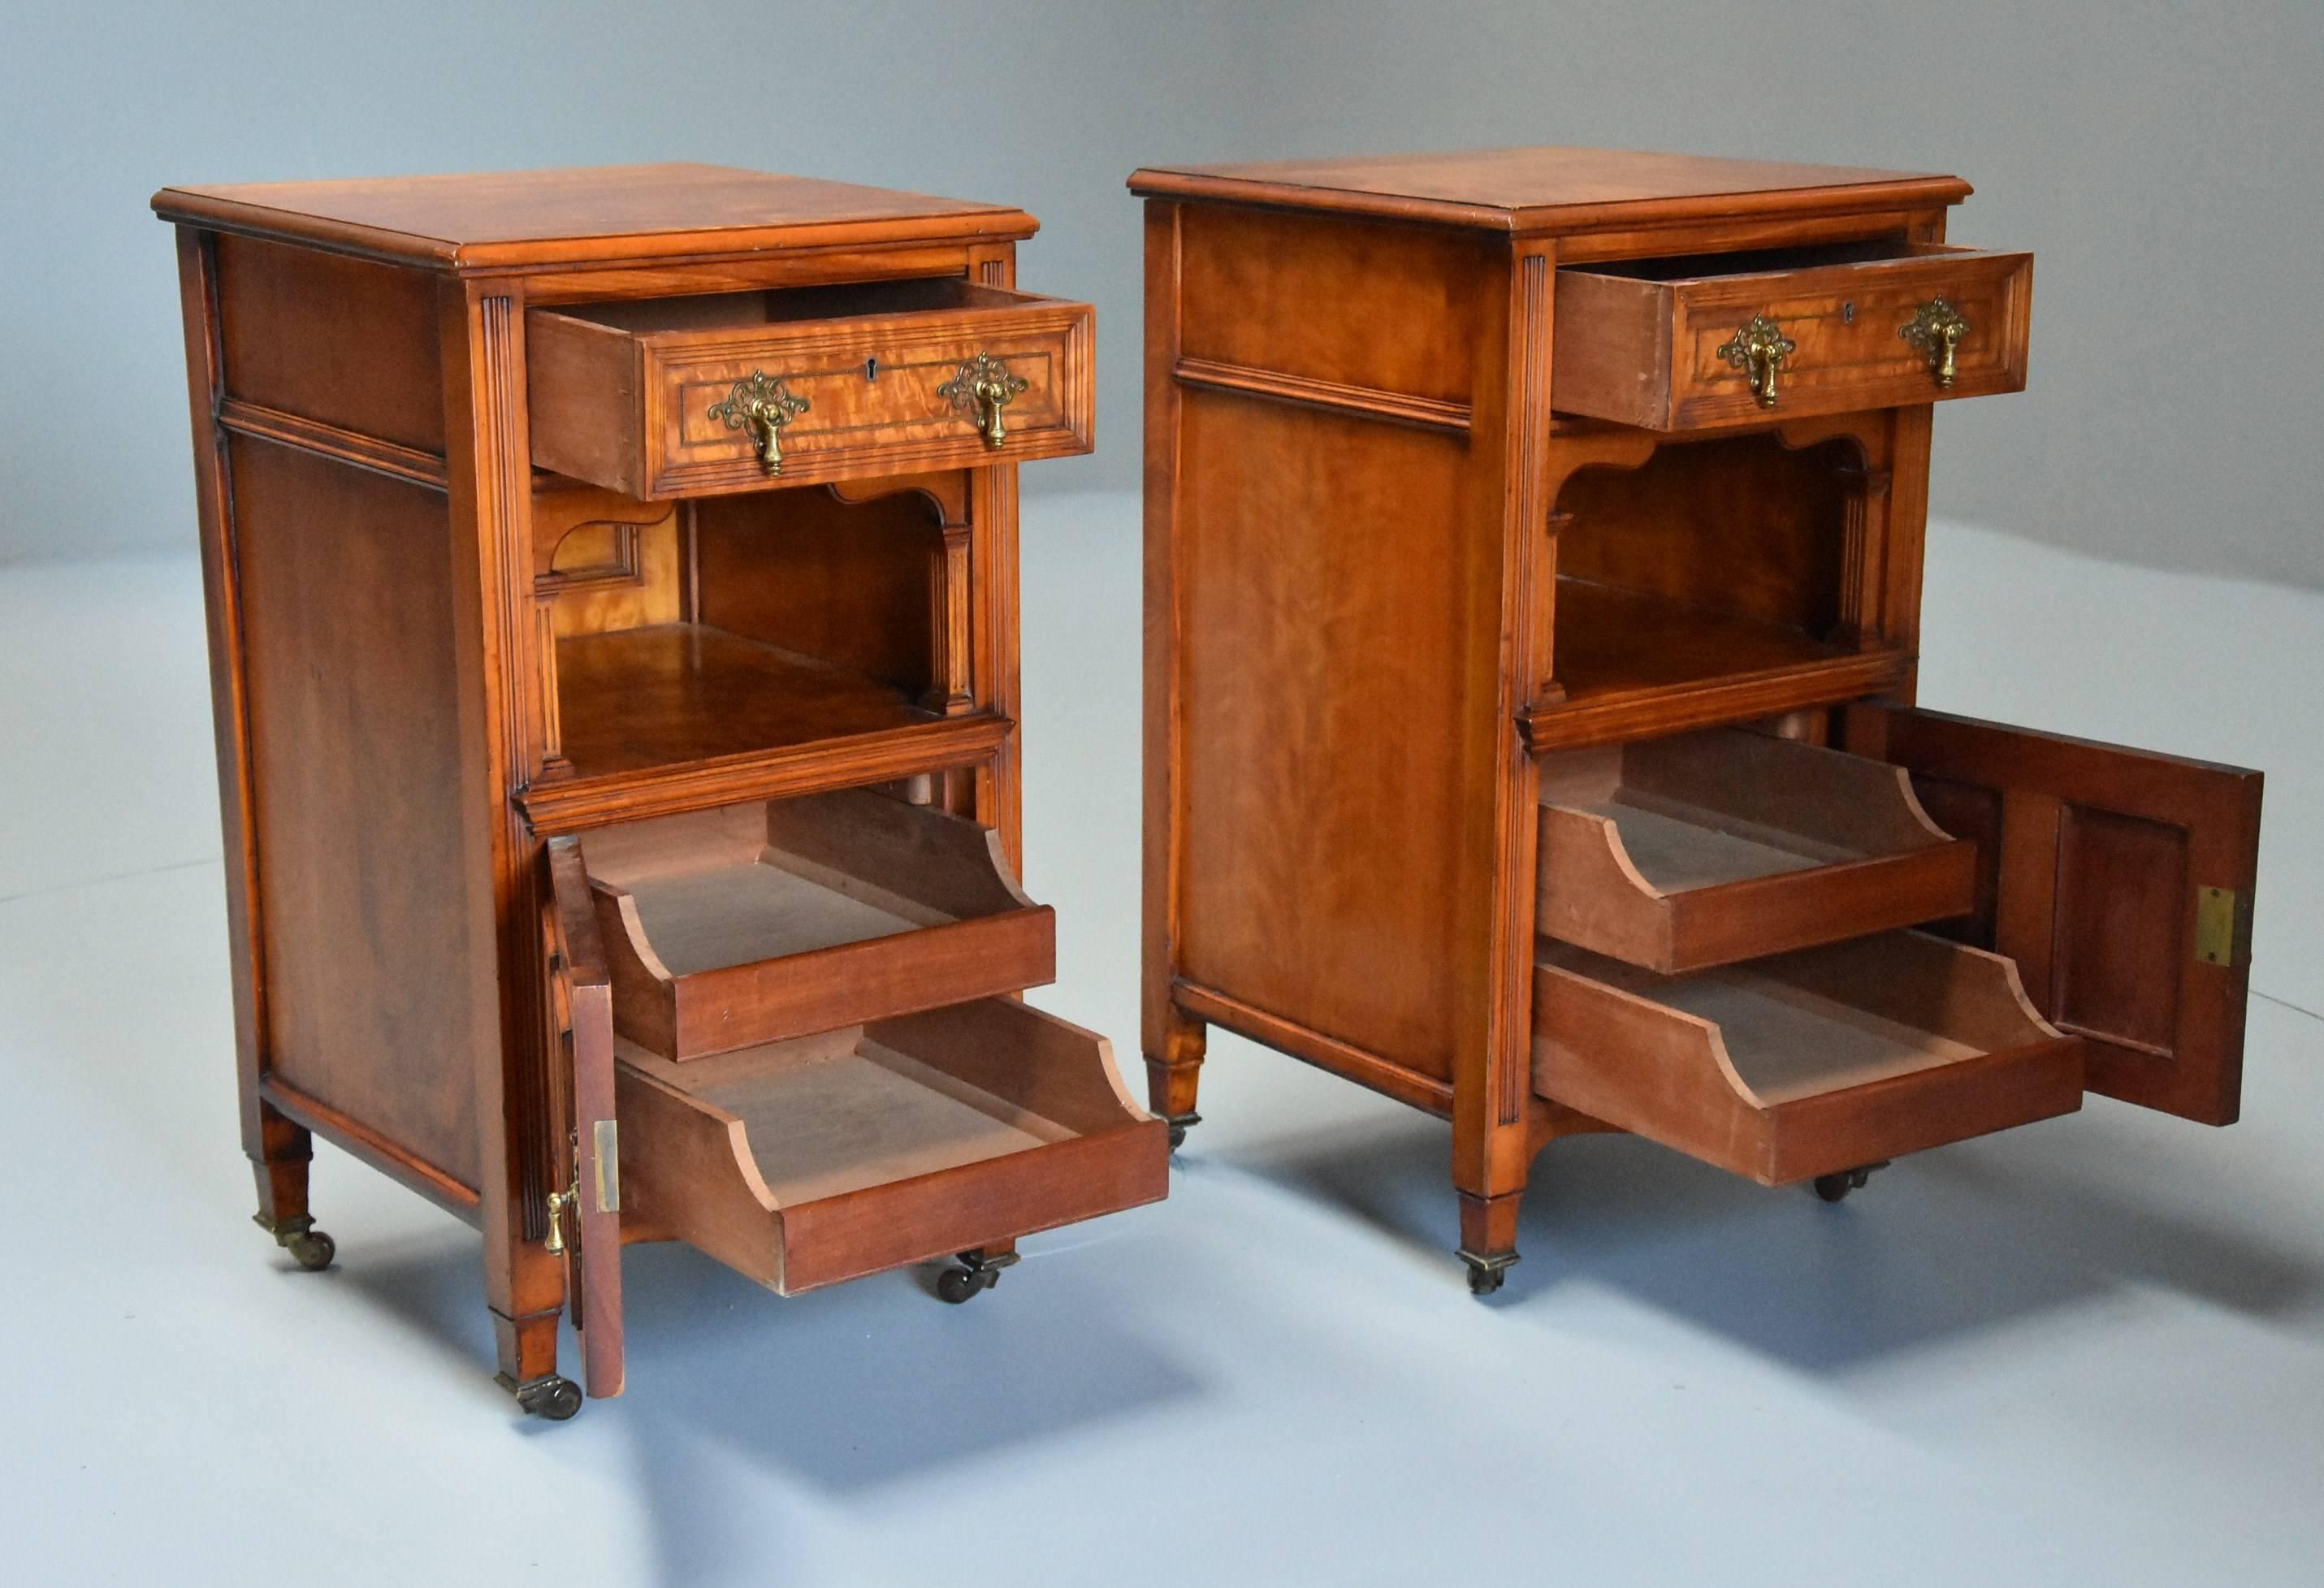 Aesthetic Movement Pair of Late 19th Century Satin Birch Bedside Cabinets with Aesthetic Influence